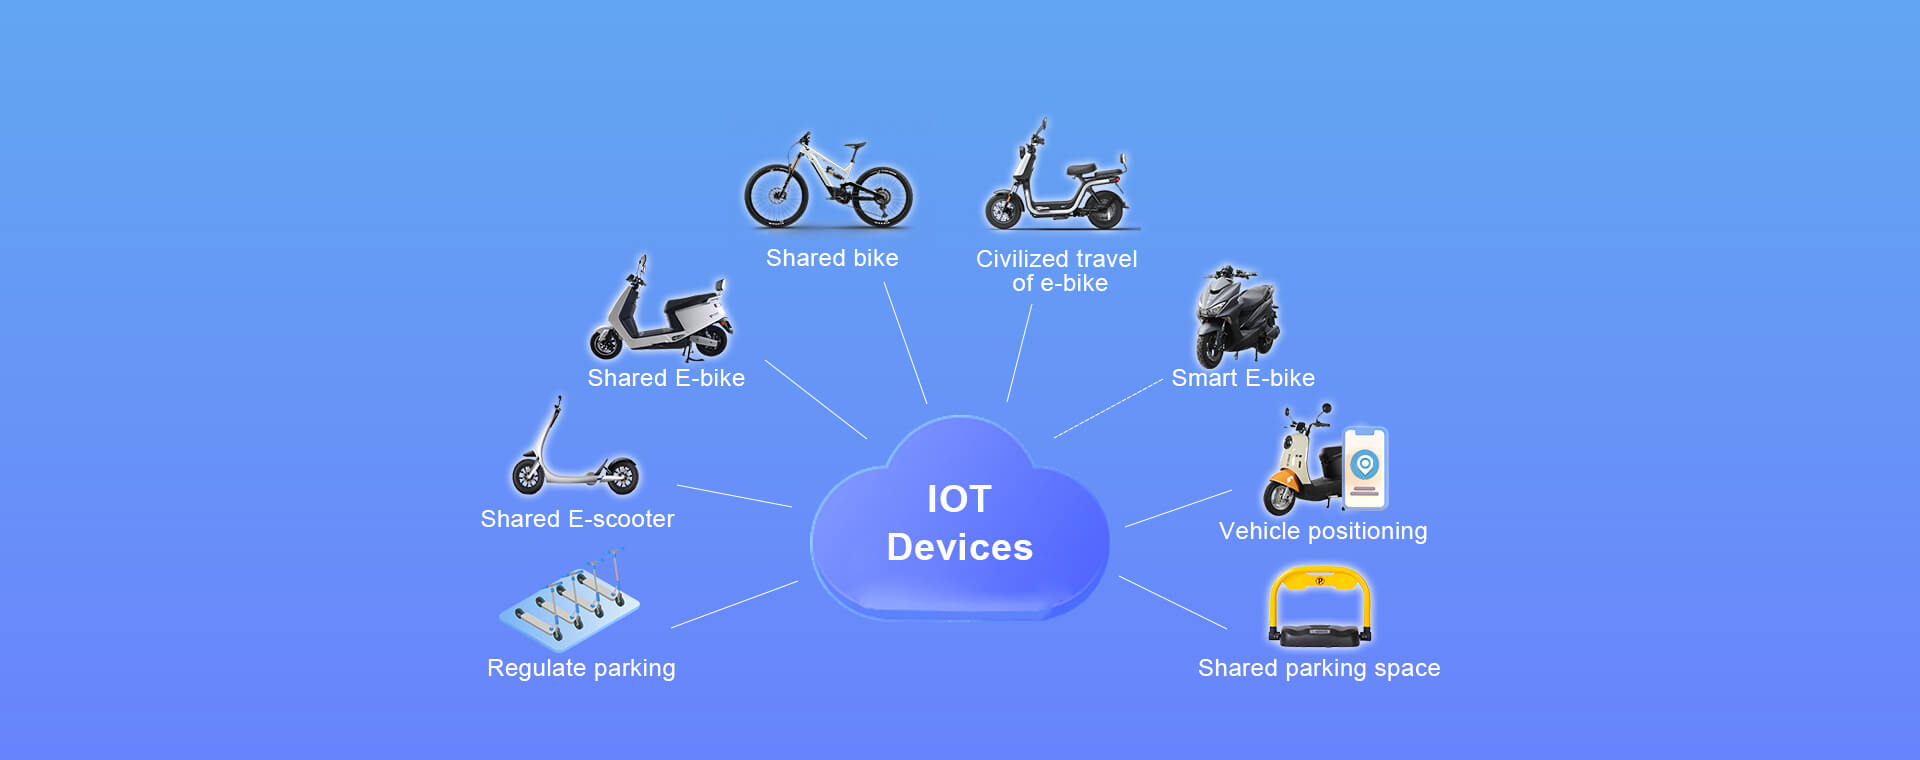 Smart IOT devices